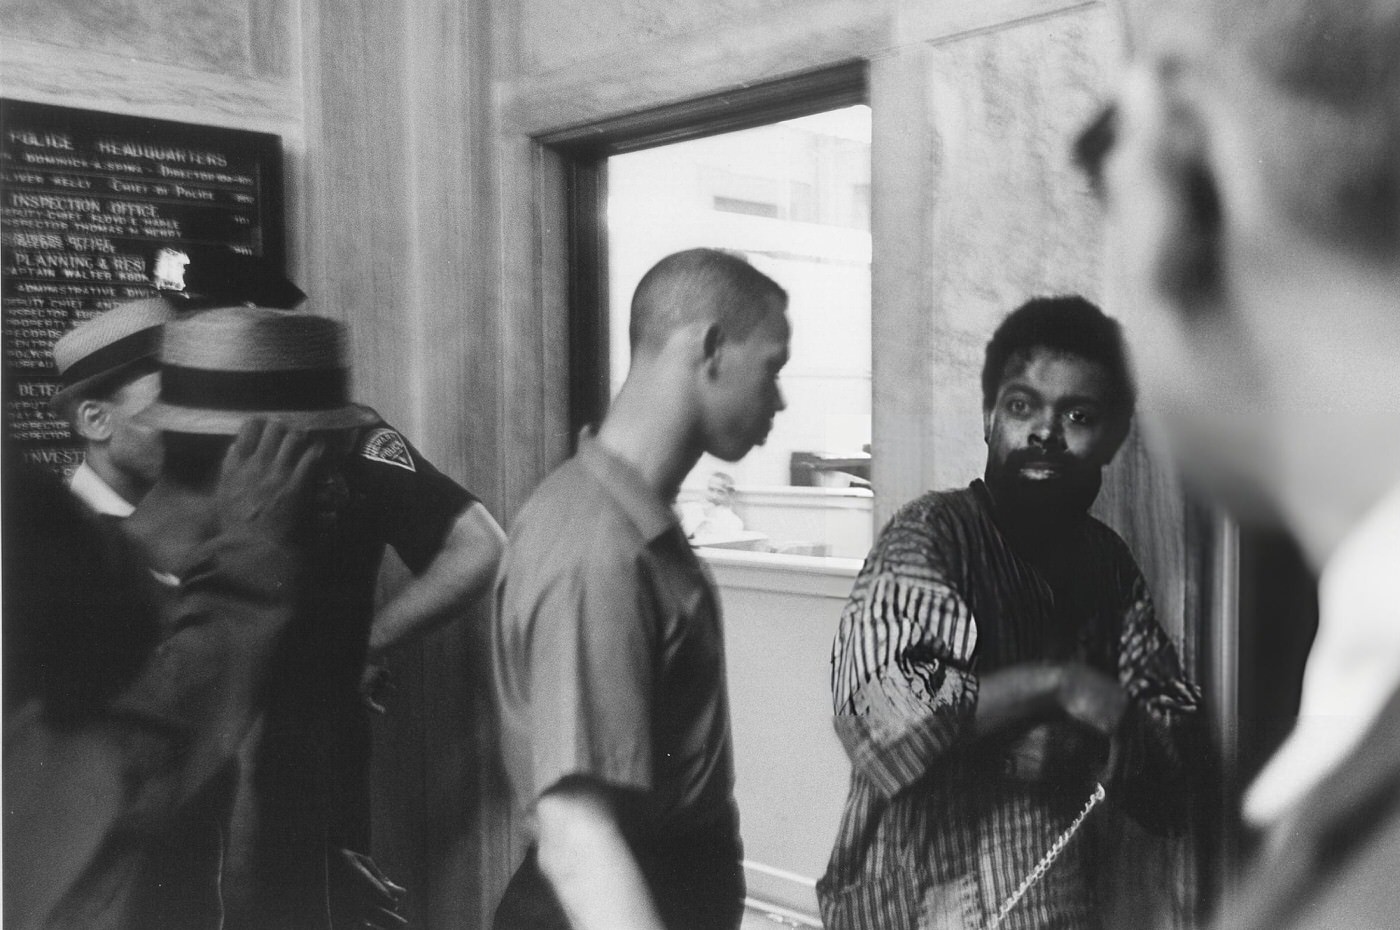 LeRoi Jones in a police station, bloodied and in chains after being arrested.